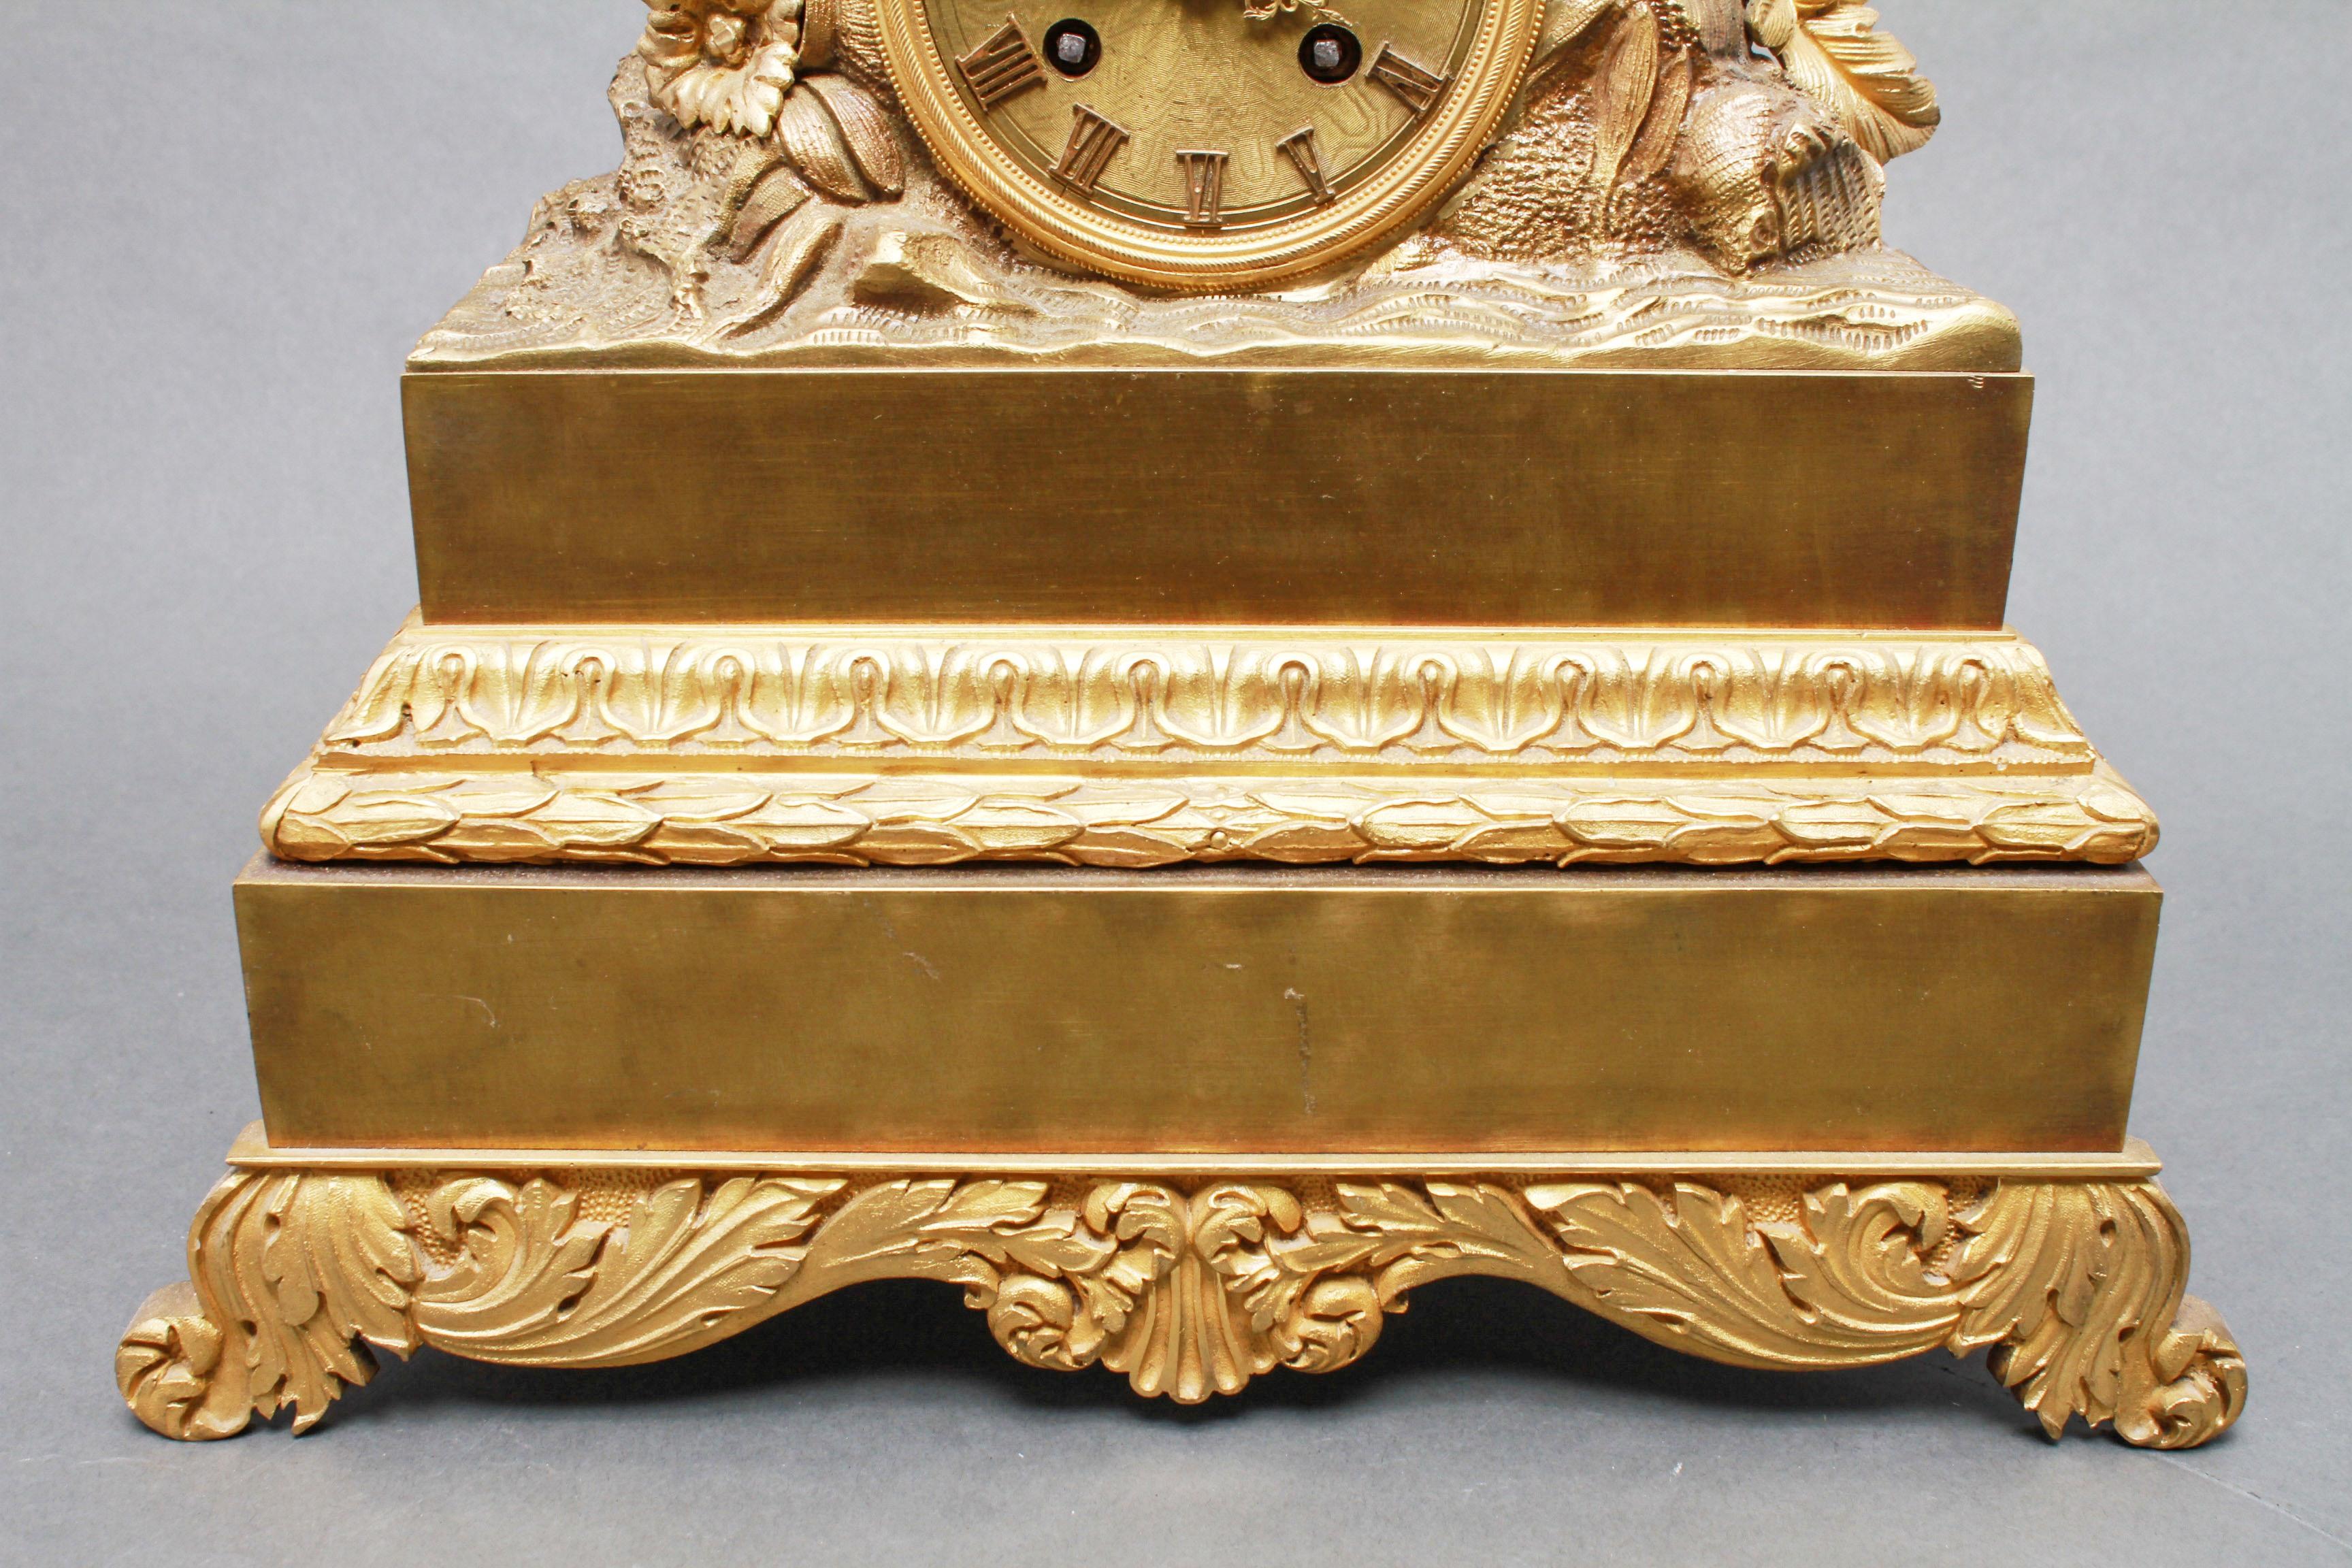 19th Century Charles Pickard French Neoclassical Revival Ormolu Gilt Bronze Mantel Clock For Sale